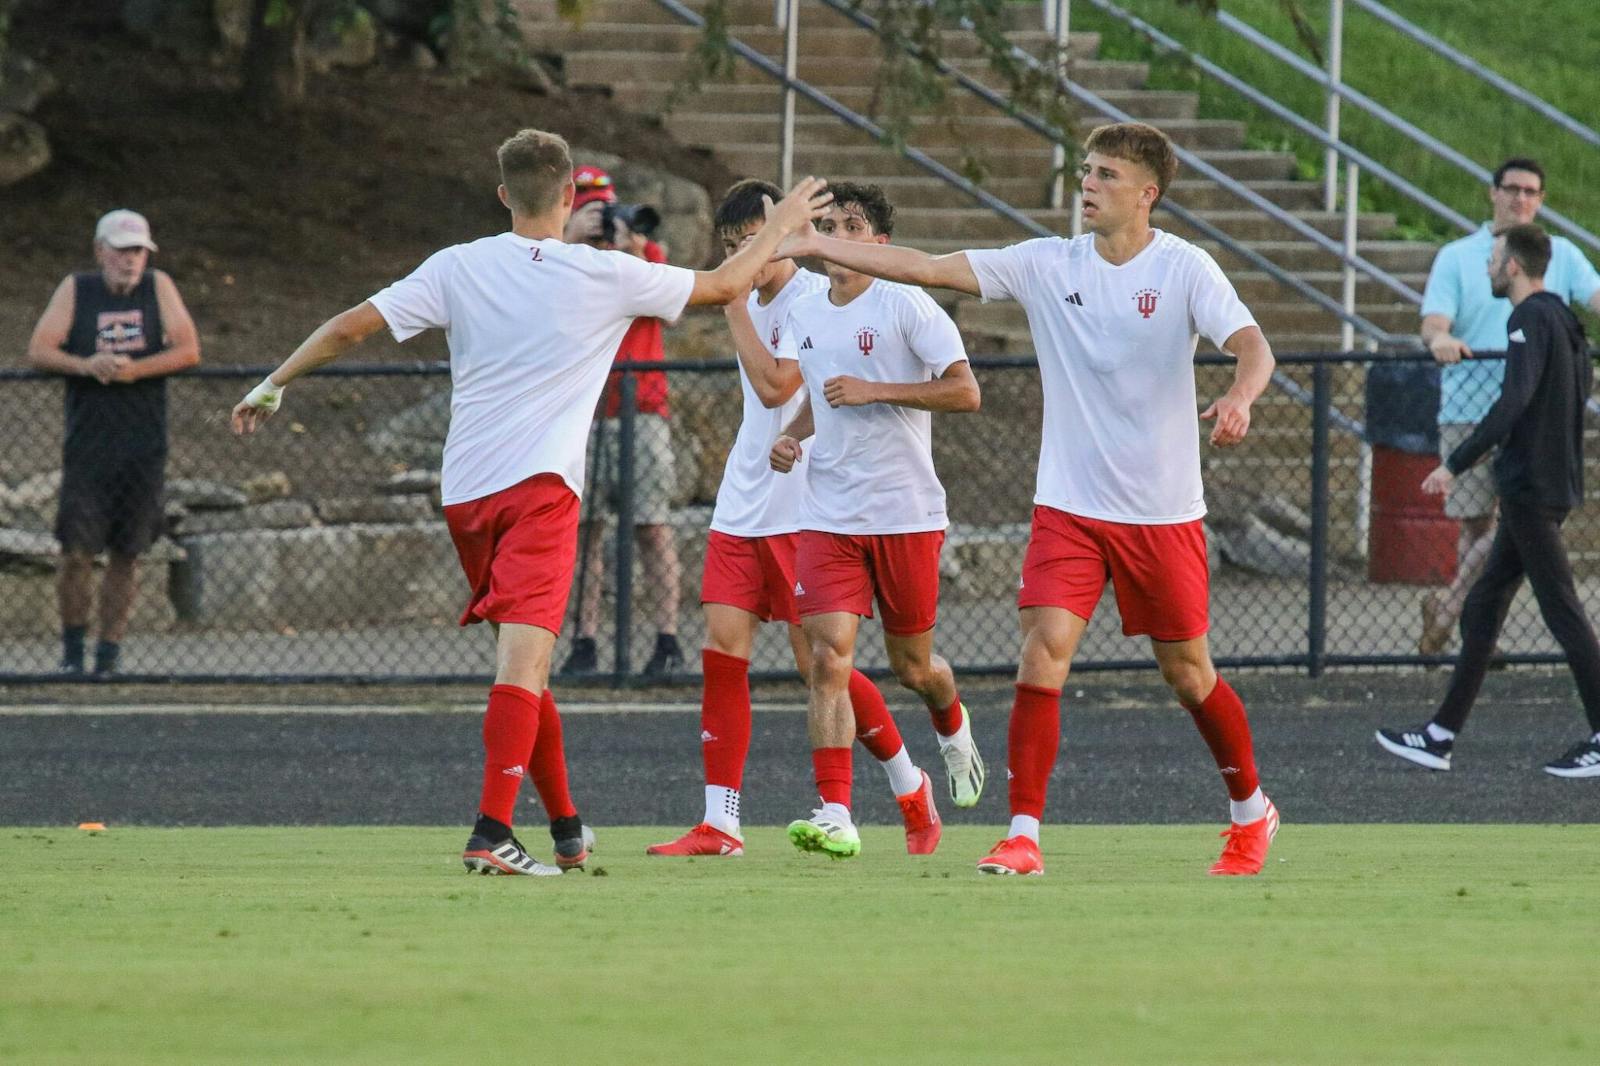 UofL men's soccer falls in NCAA Tournament first round